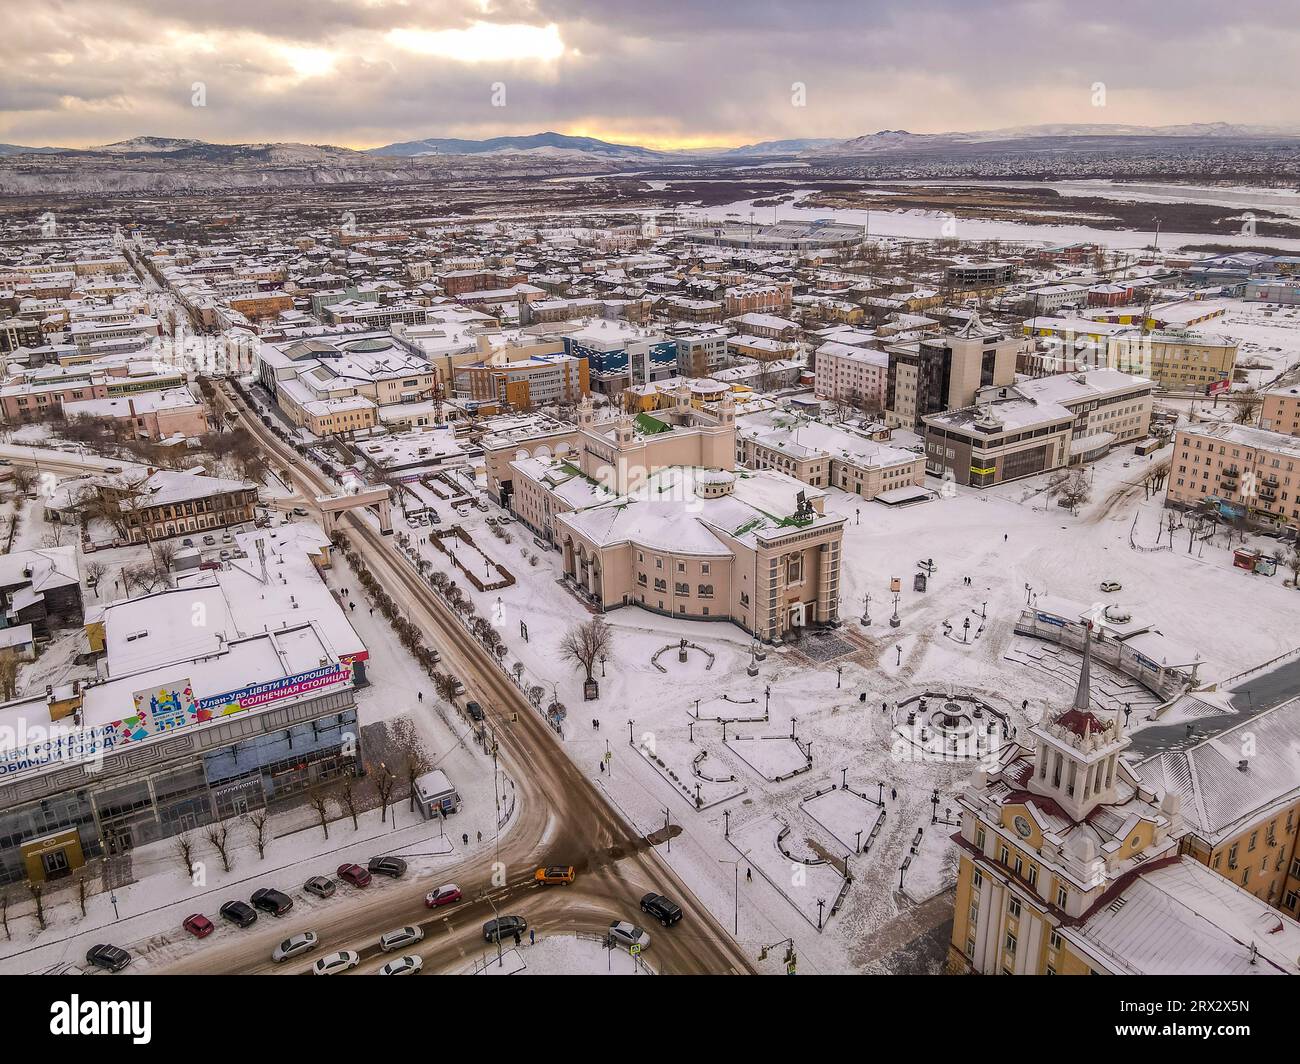 The downtown of the Siberian city of Ulan-Ude (Republic of Buryatiya, Russia), with the theater building, Soviet architecture, and city plaza Stock Photo